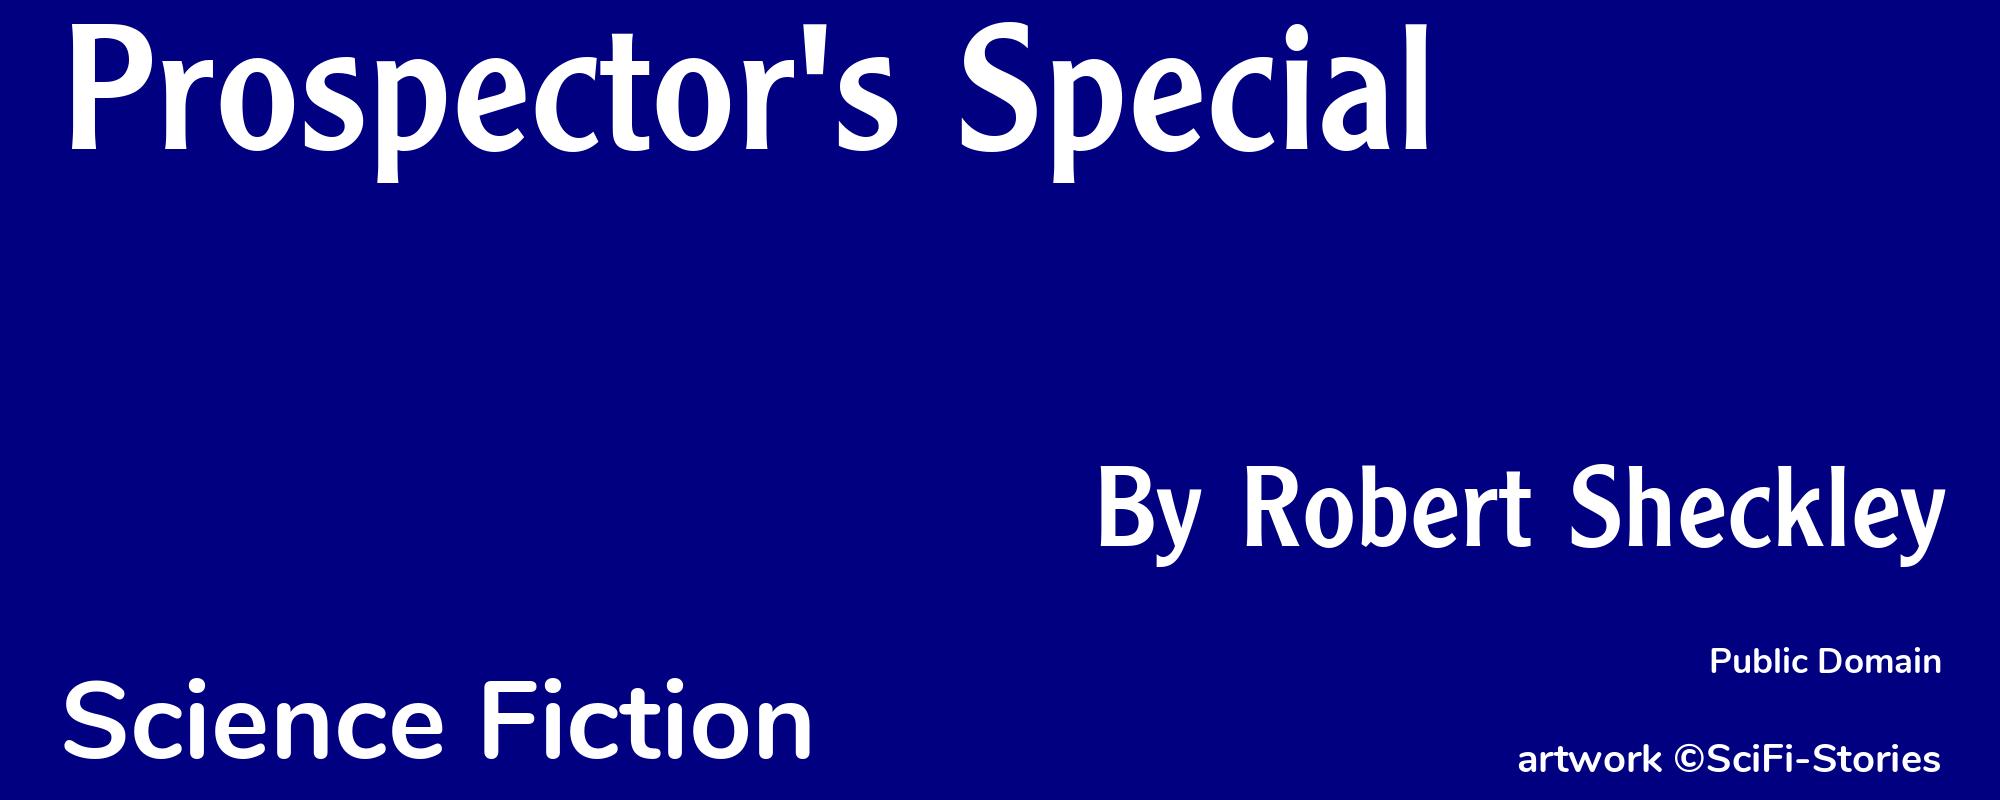 Prospector's Special - Cover